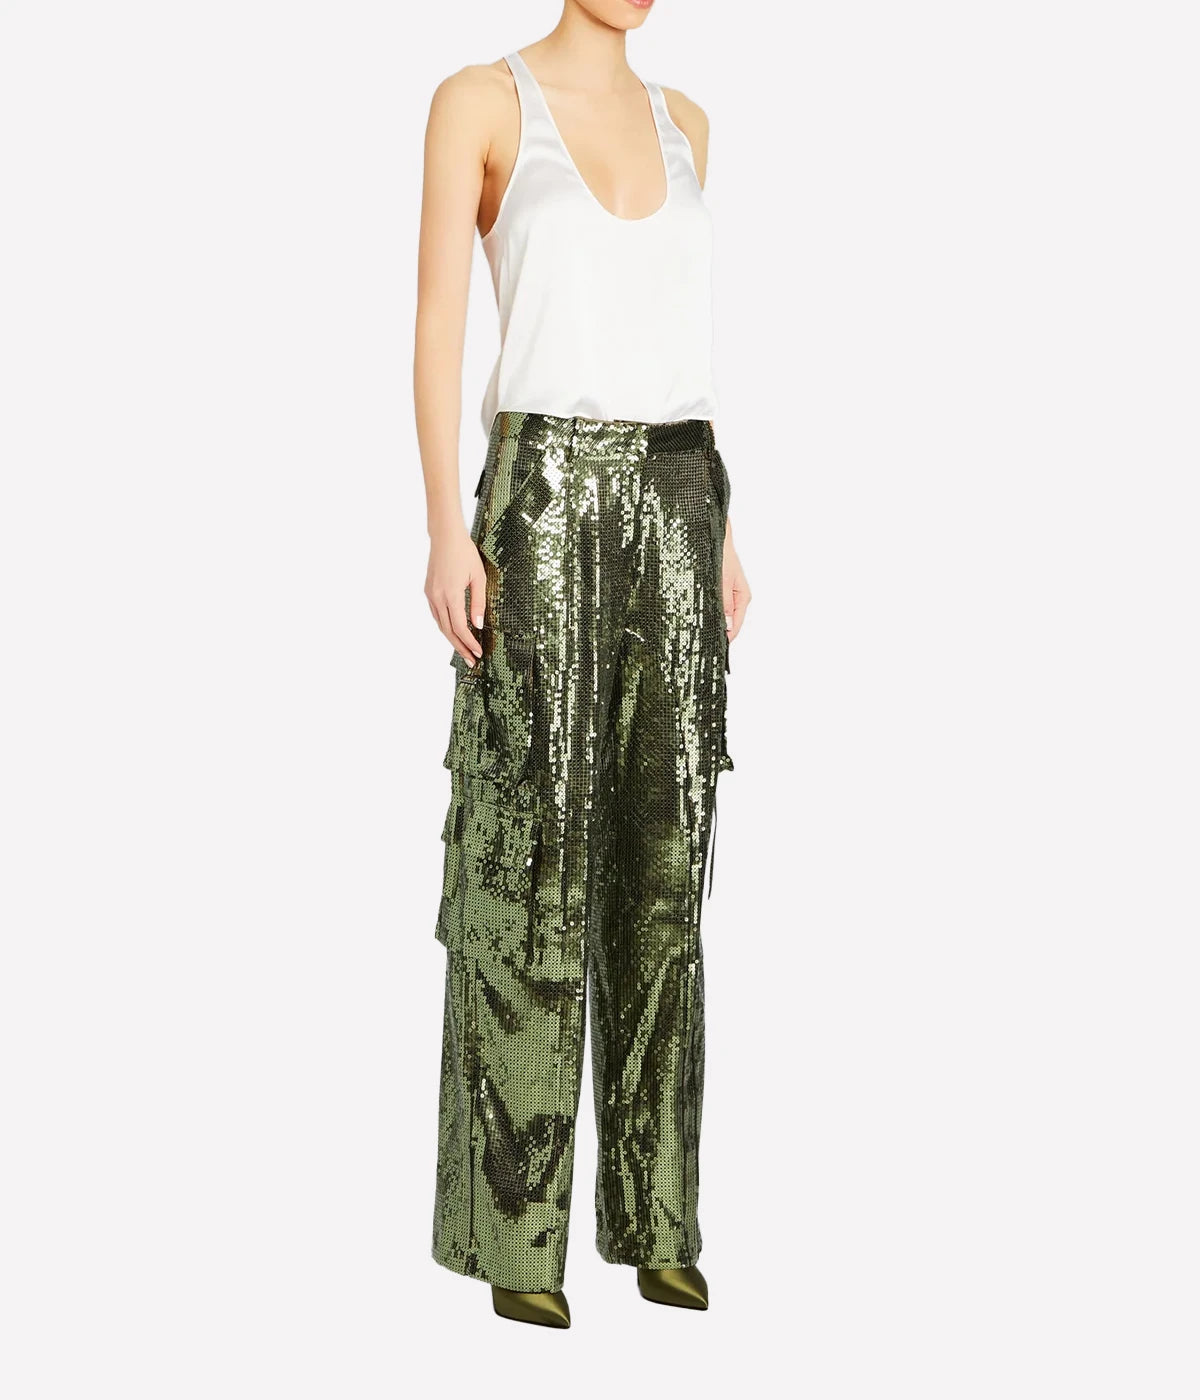 Andre Pant in Military Green Sequin